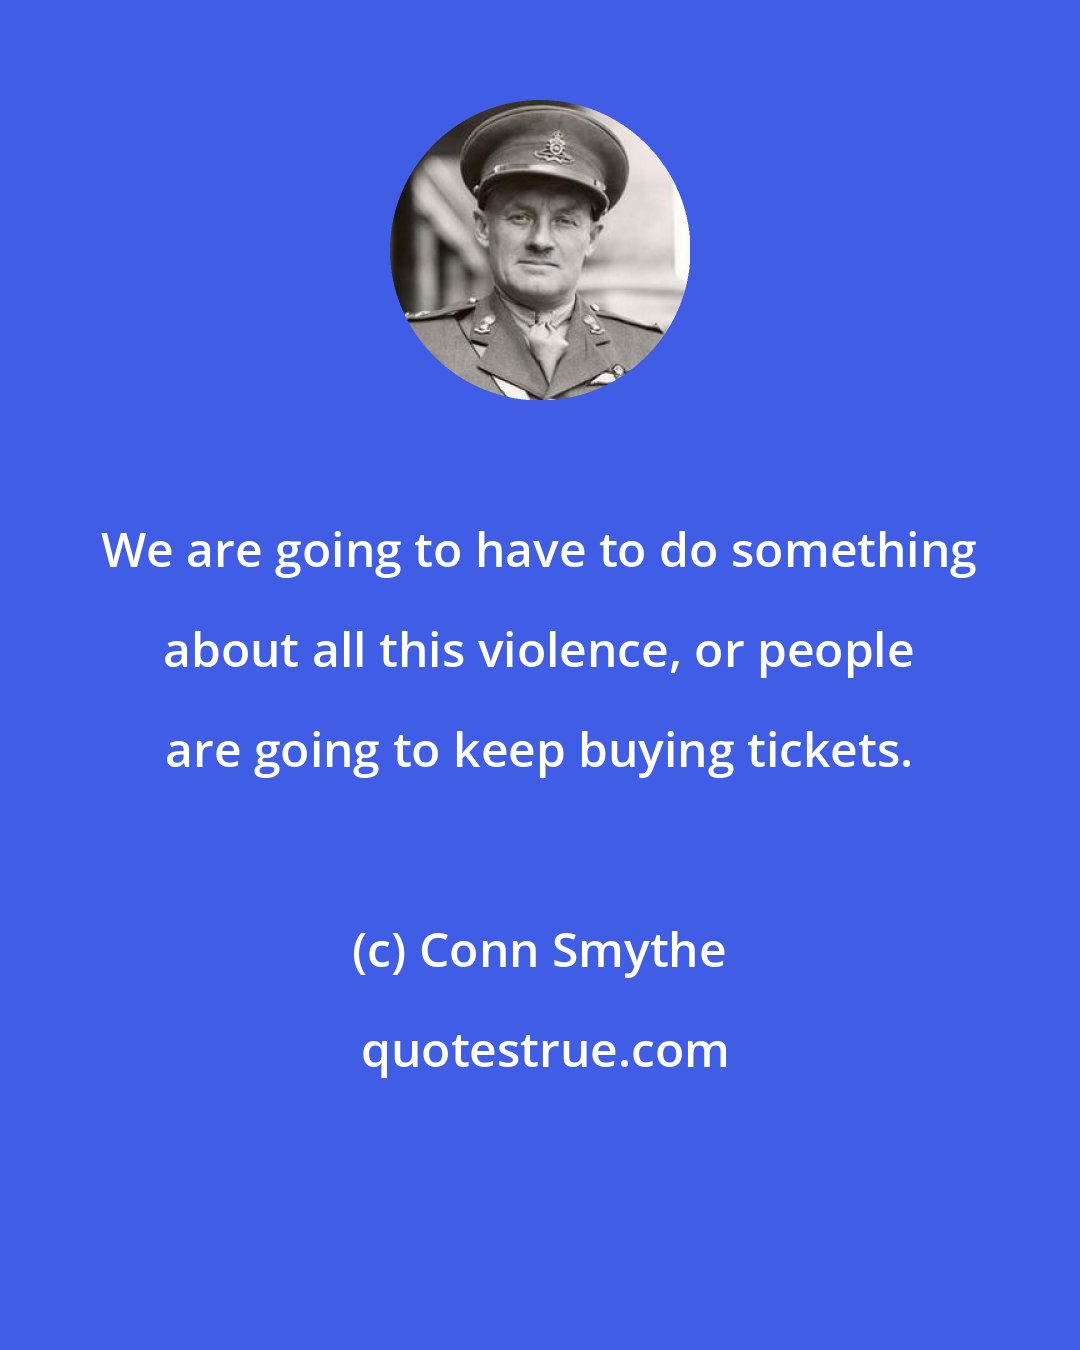 Conn Smythe: We are going to have to do something about all this violence, or people are going to keep buying tickets.